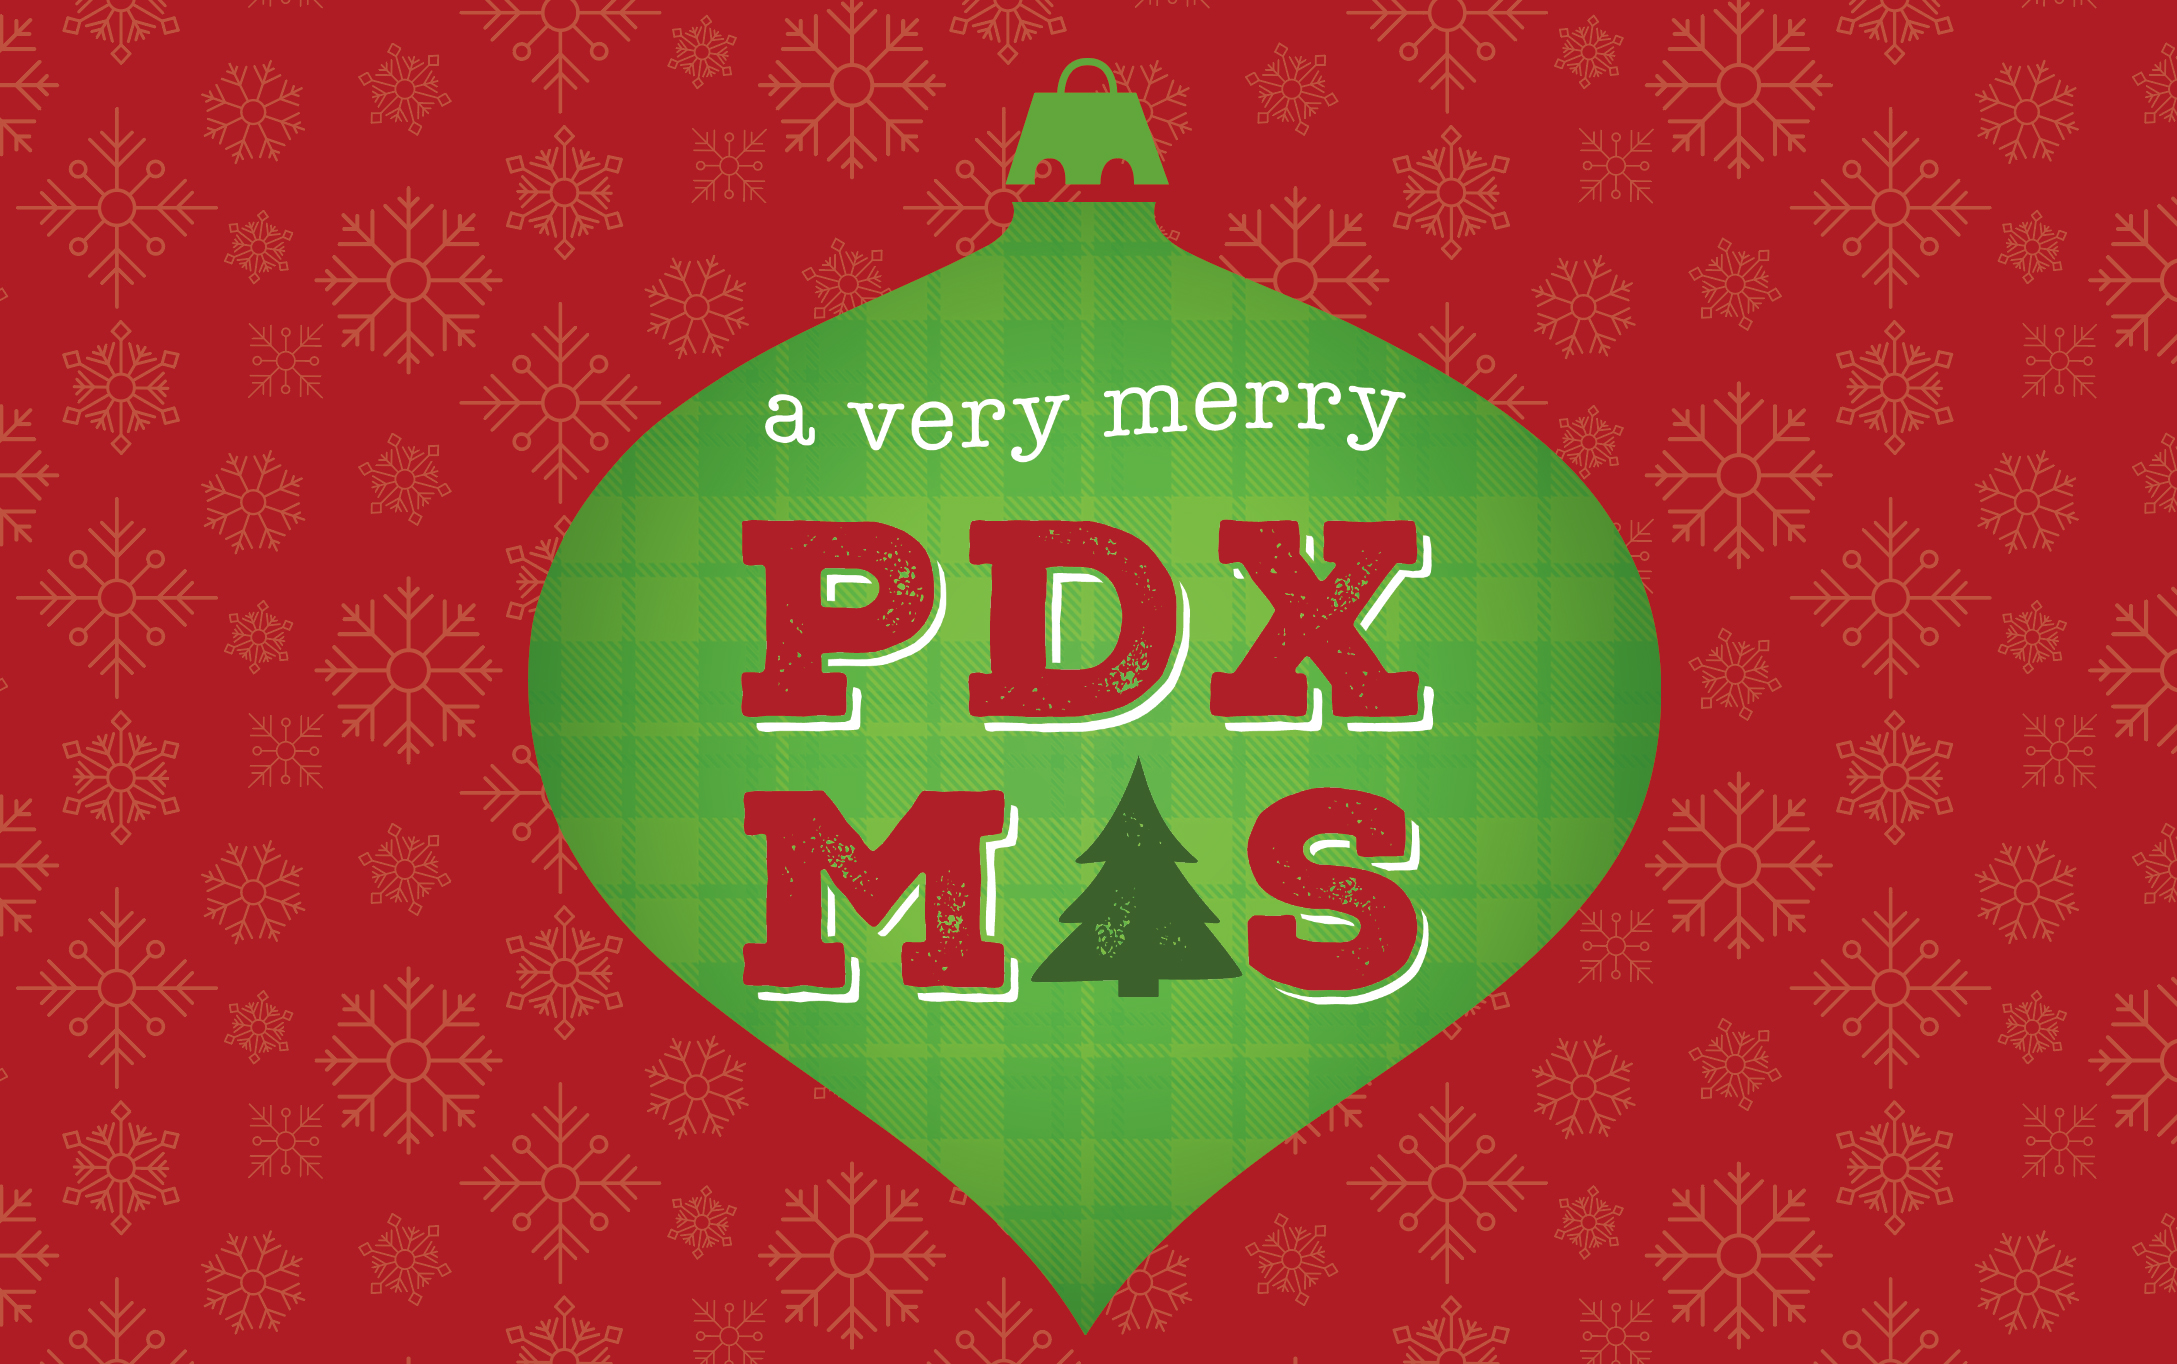 Logo for A Very Merry PDX-mas 